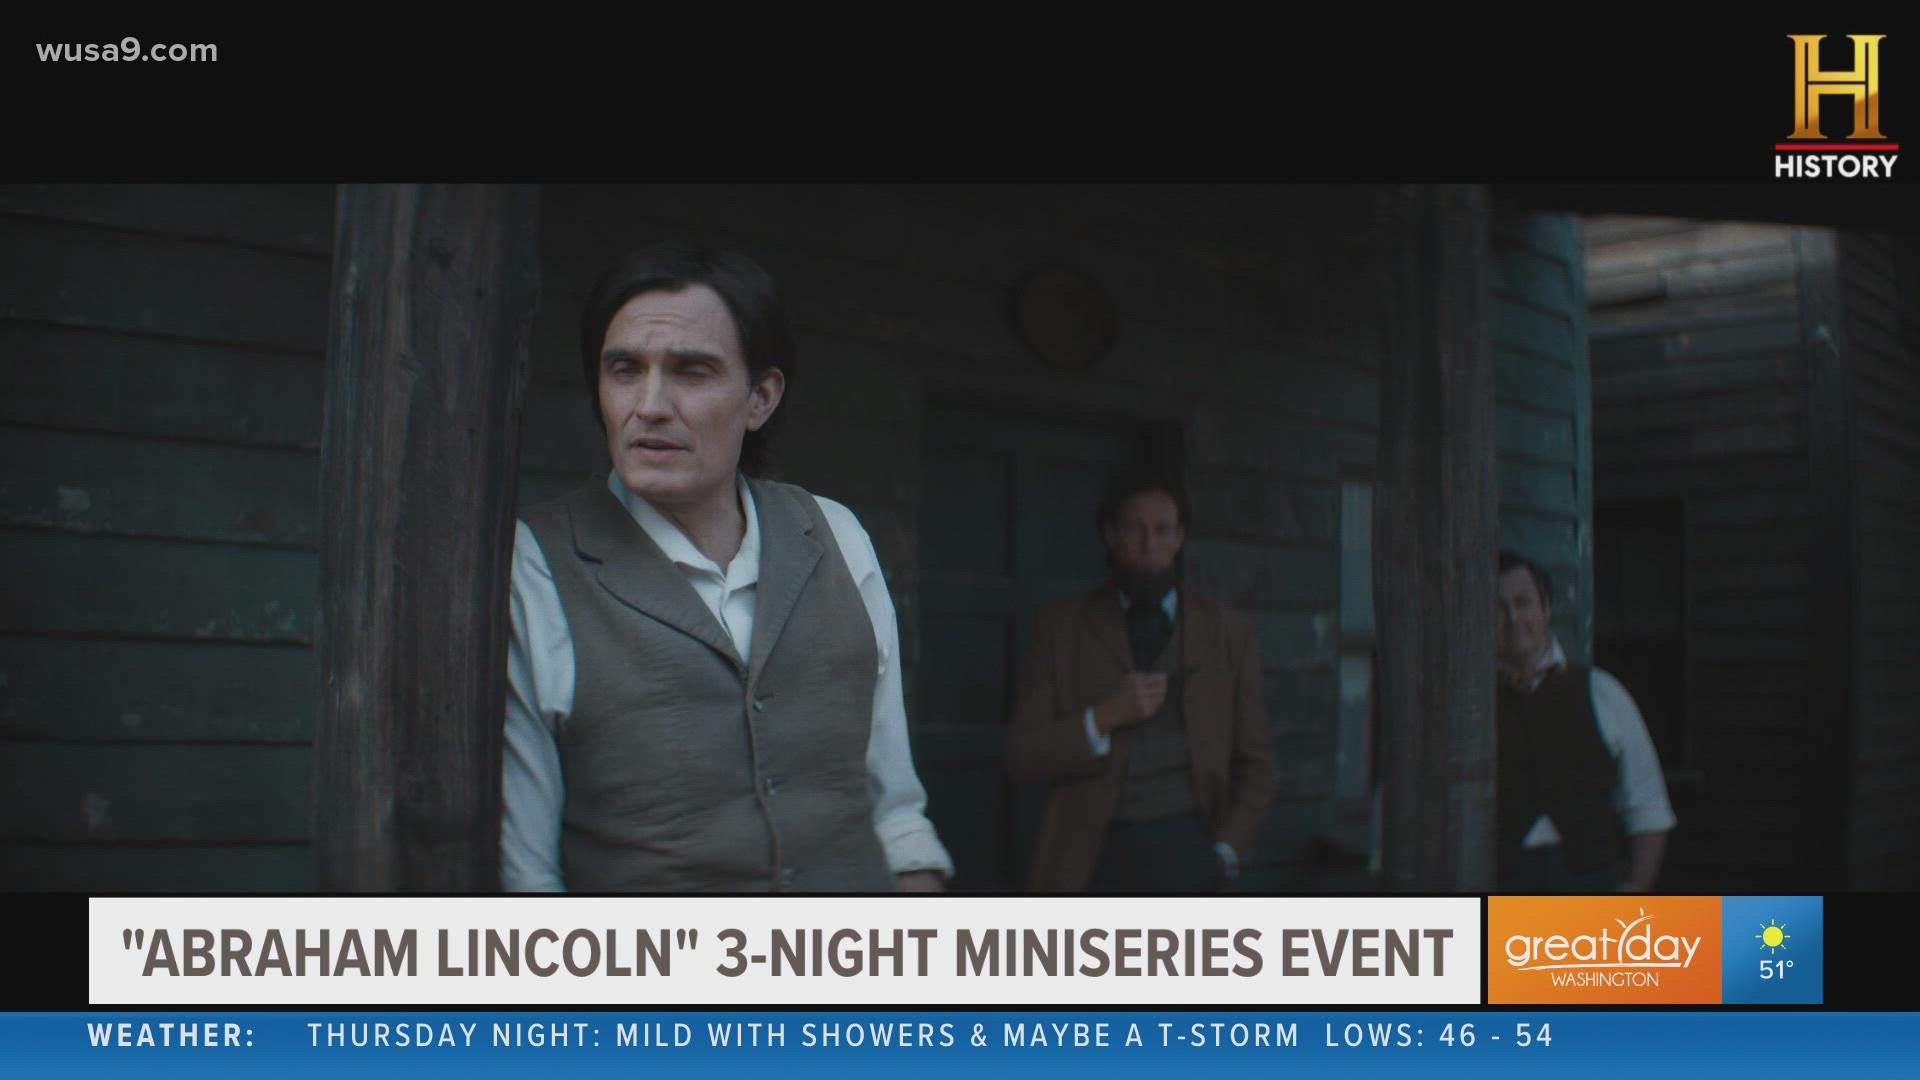 Graham Sibley talks about his role as Honest Abe in the History Channel docu-series "Abraham Lincoln". Premieres Presidents' Day Weekend.